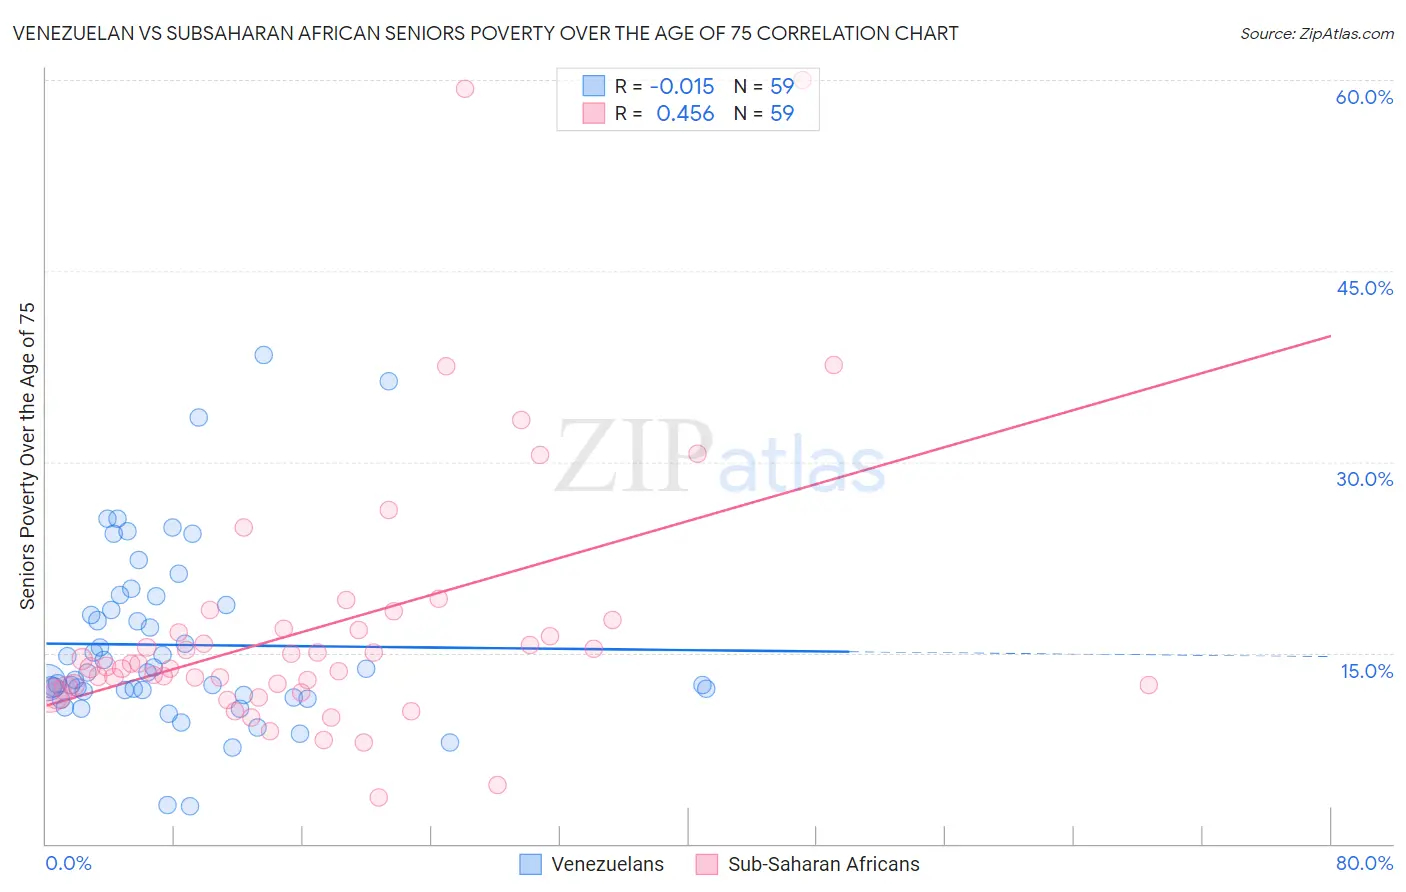 Venezuelan vs Subsaharan African Seniors Poverty Over the Age of 75